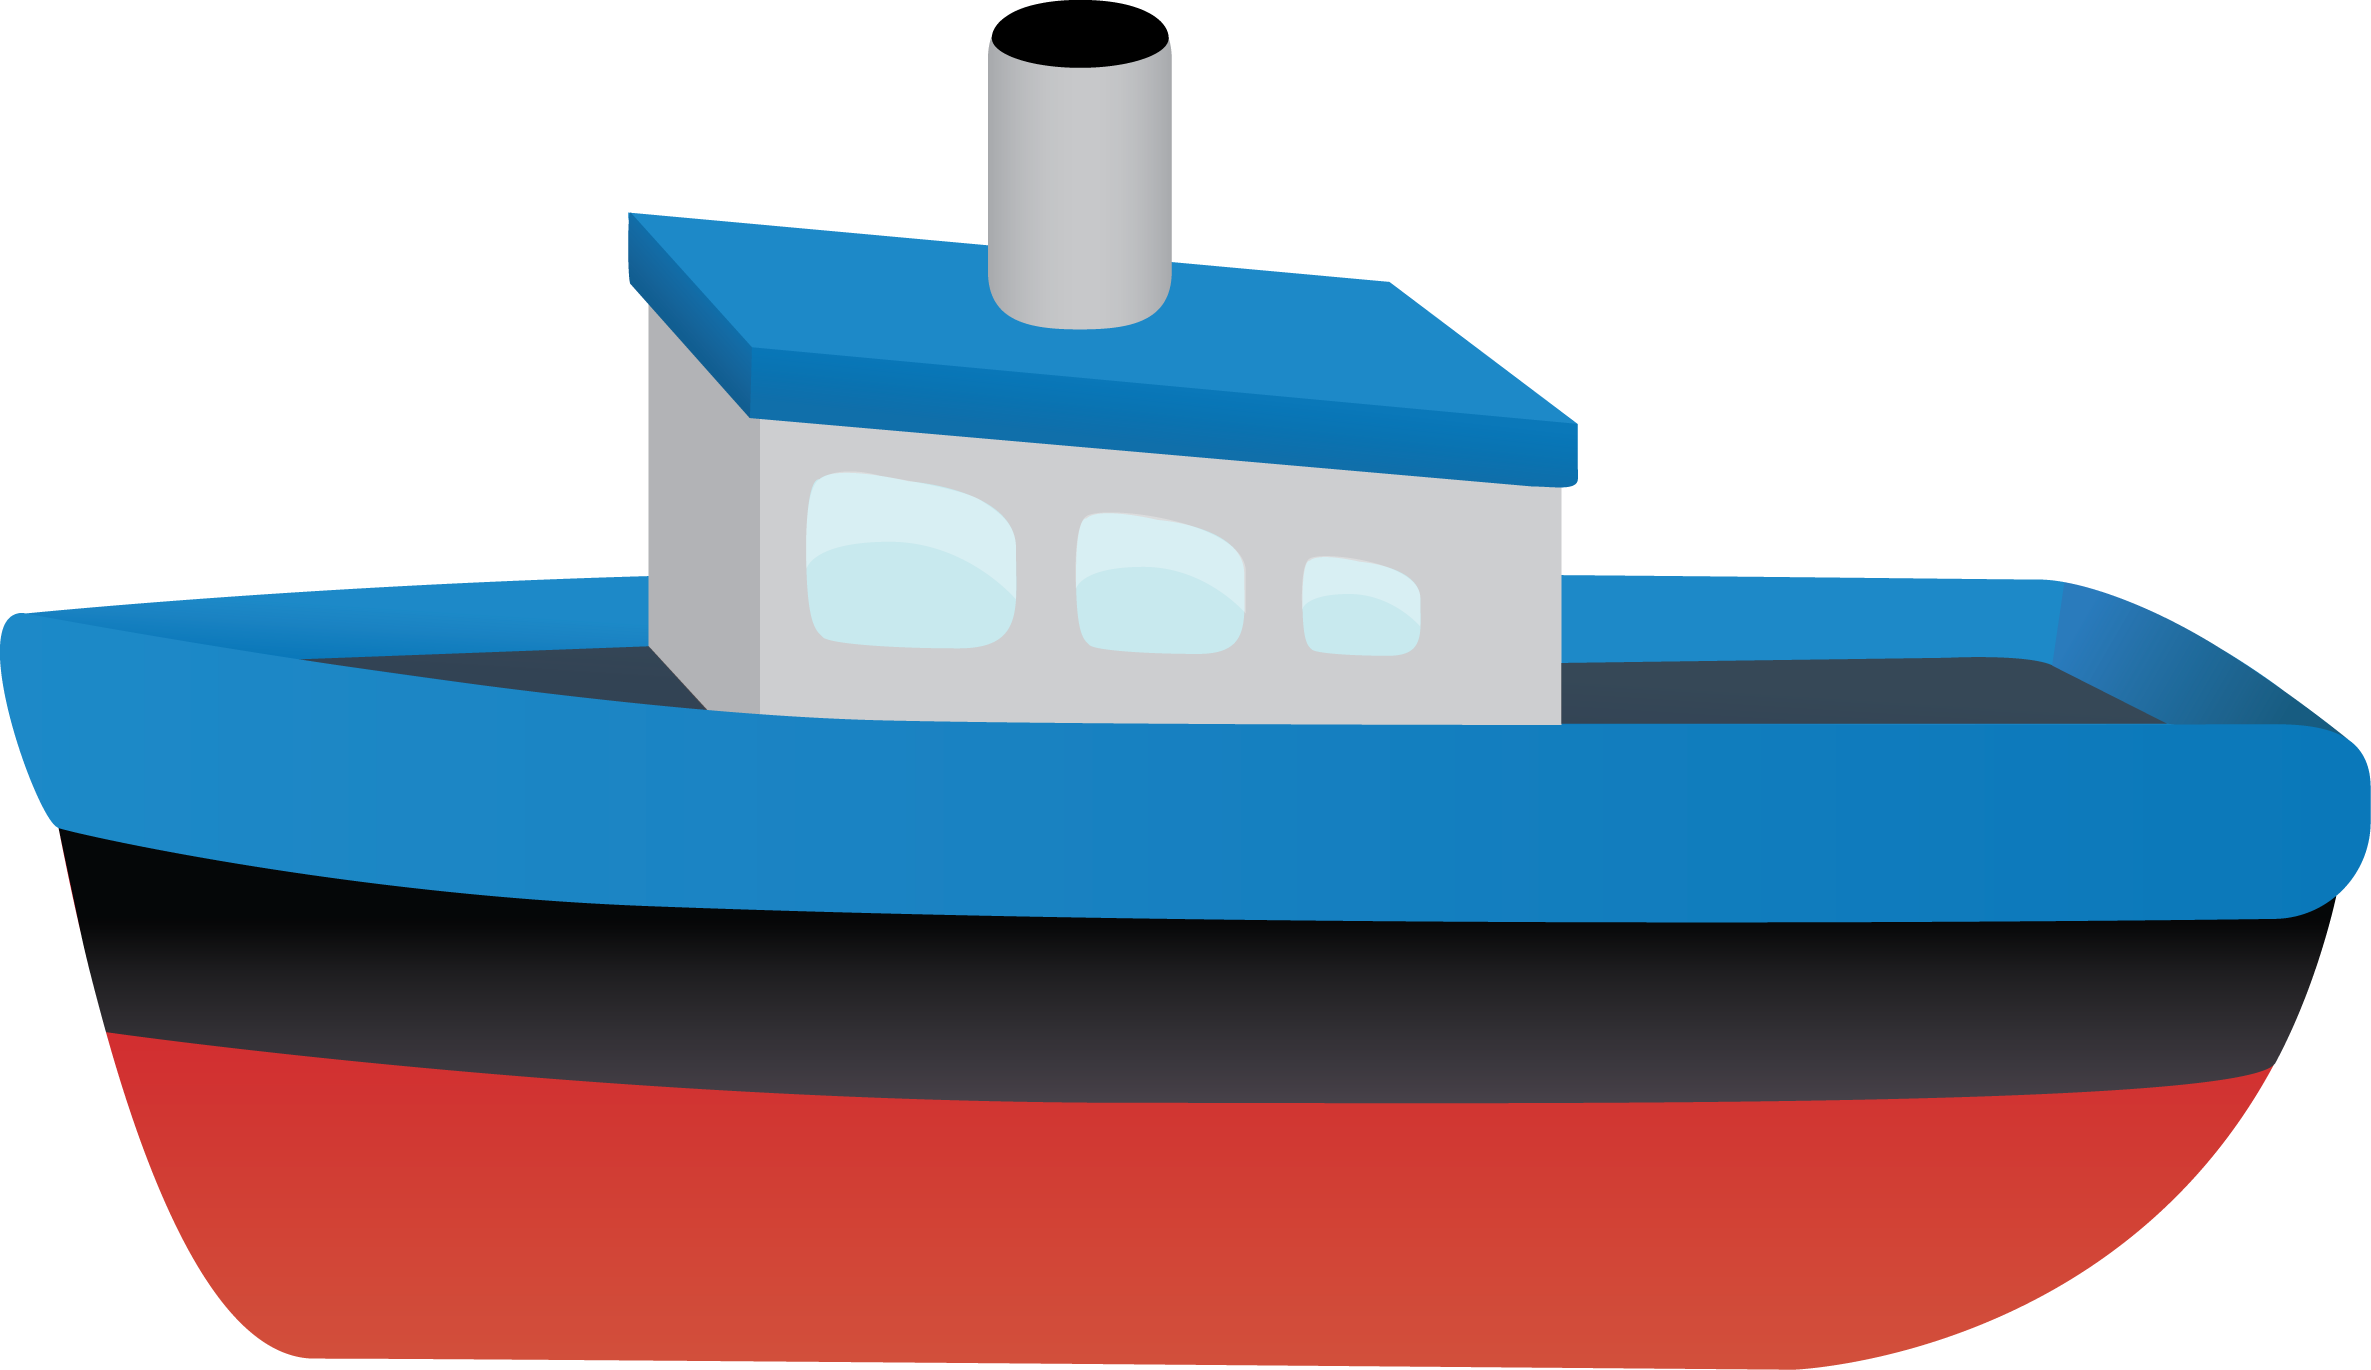 Large Yacht Boat Ship Clipart